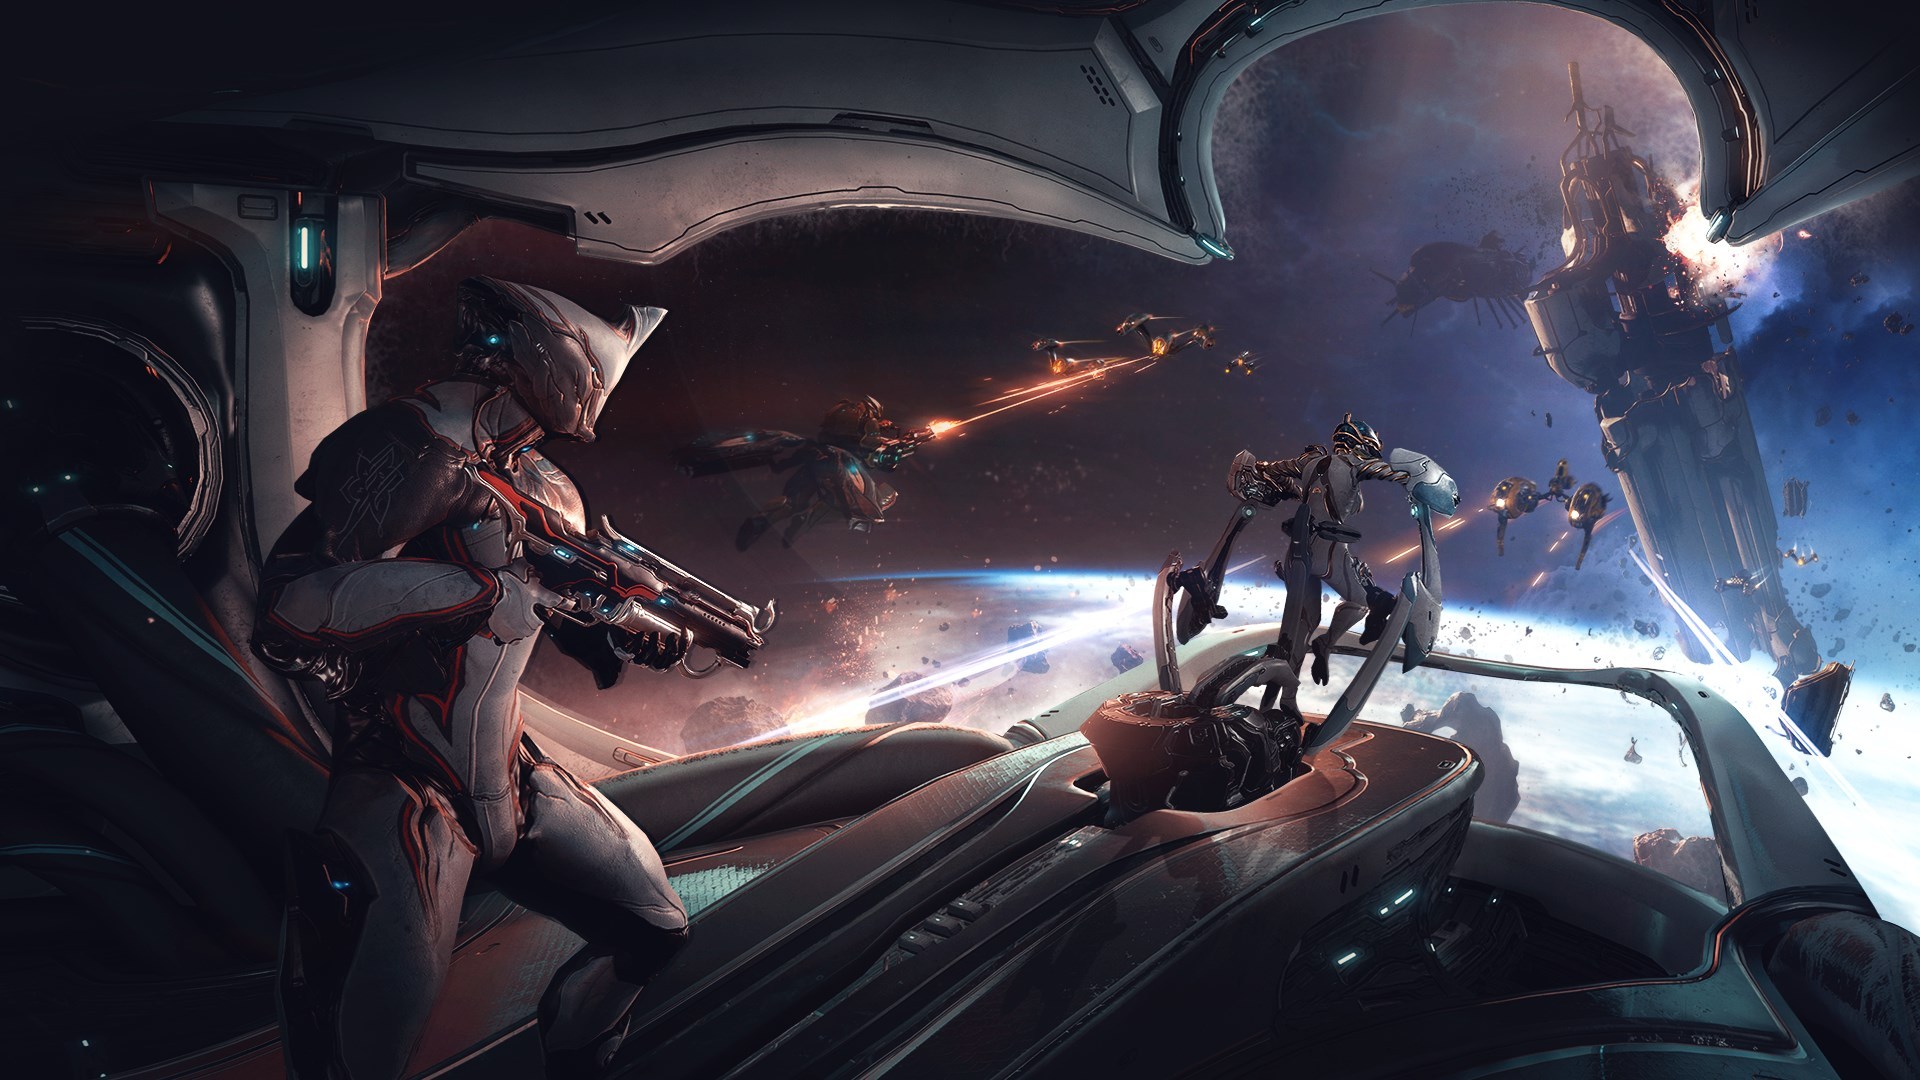 Warframe Takes Co-Op Space Combat to Next Level with Empyrean